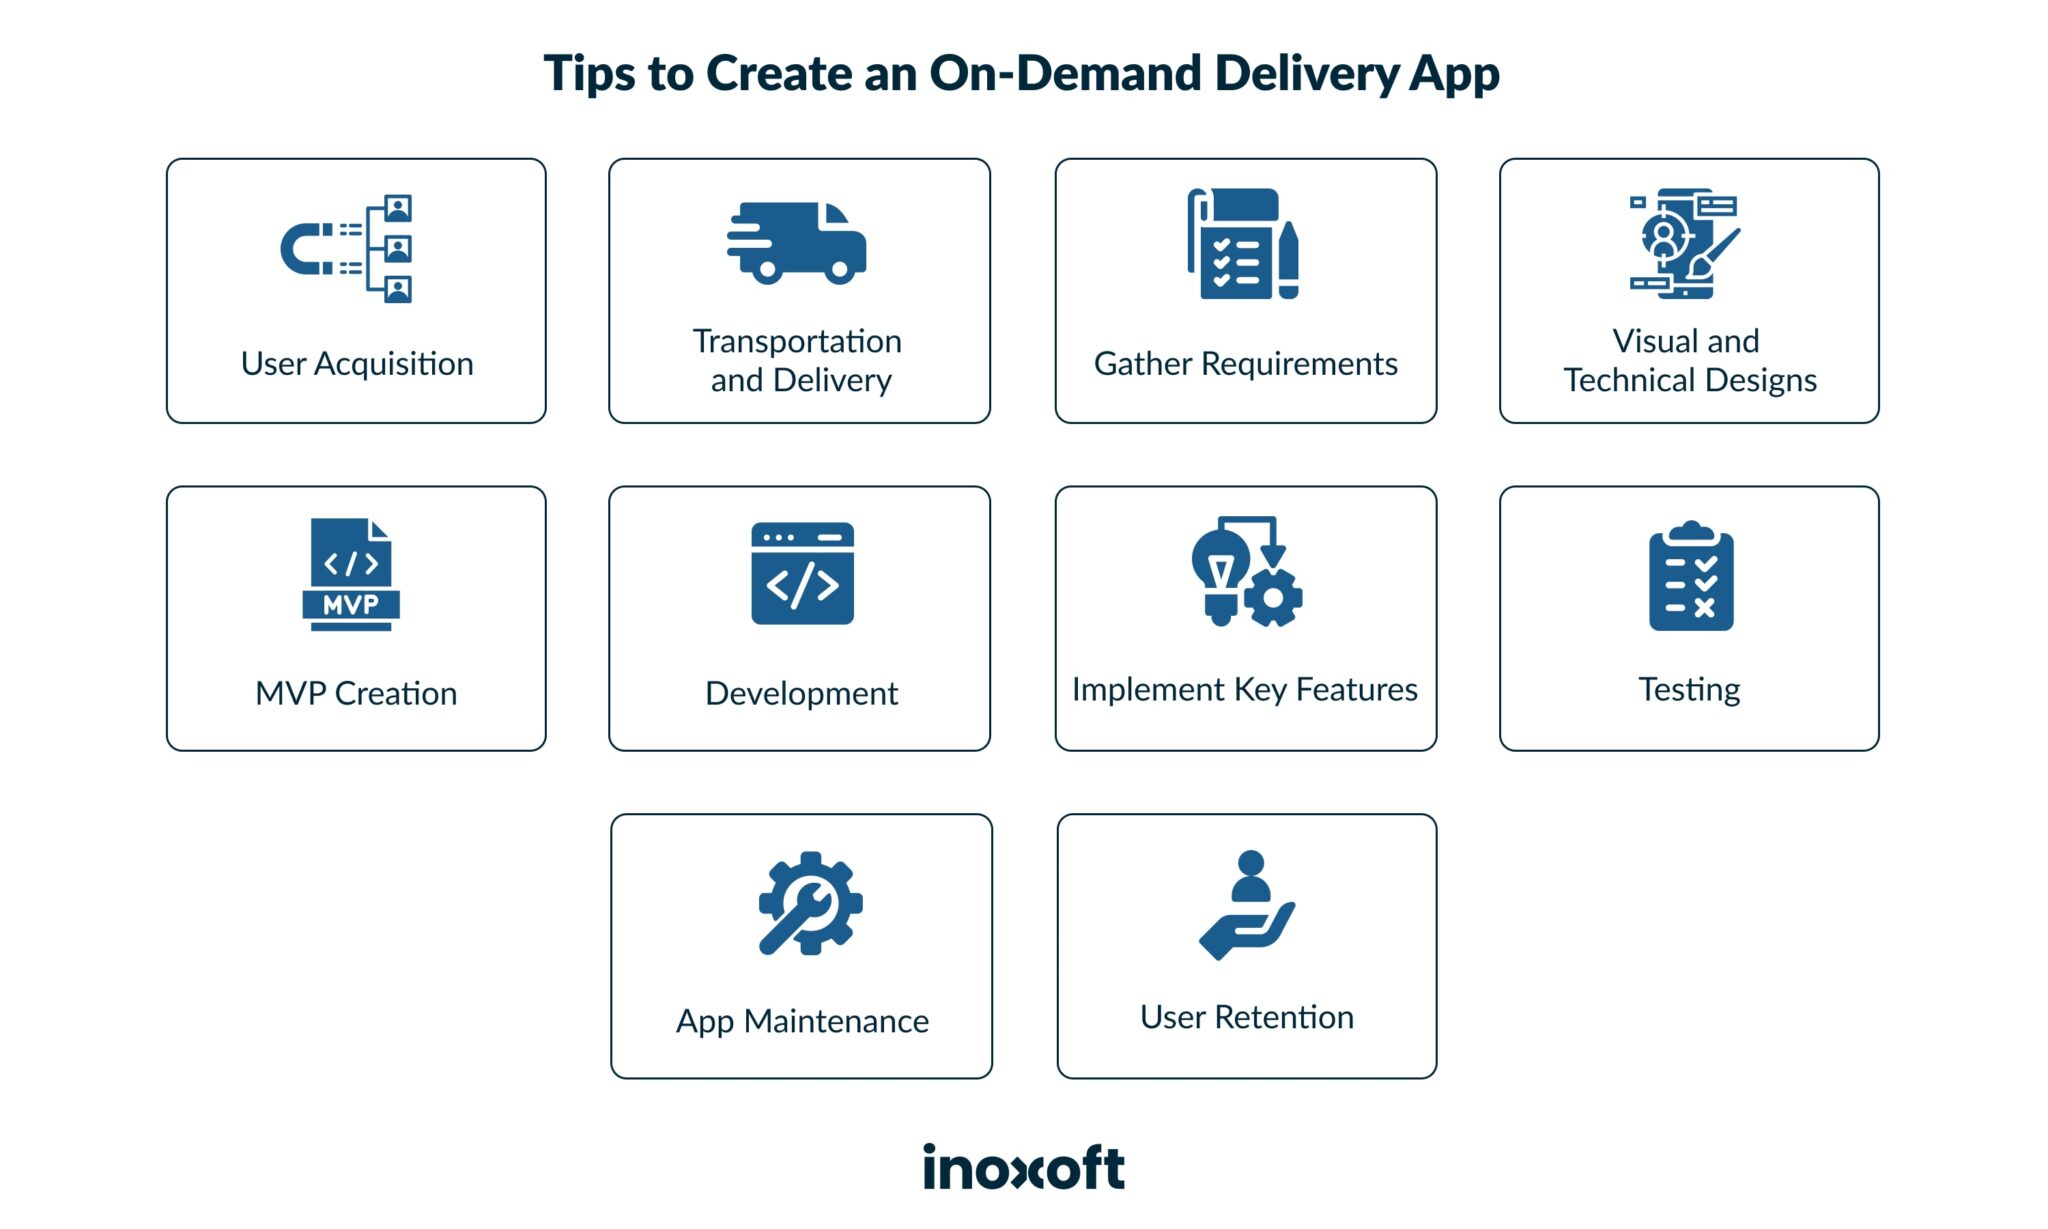 Tips to Create an On-Demand Delivery App